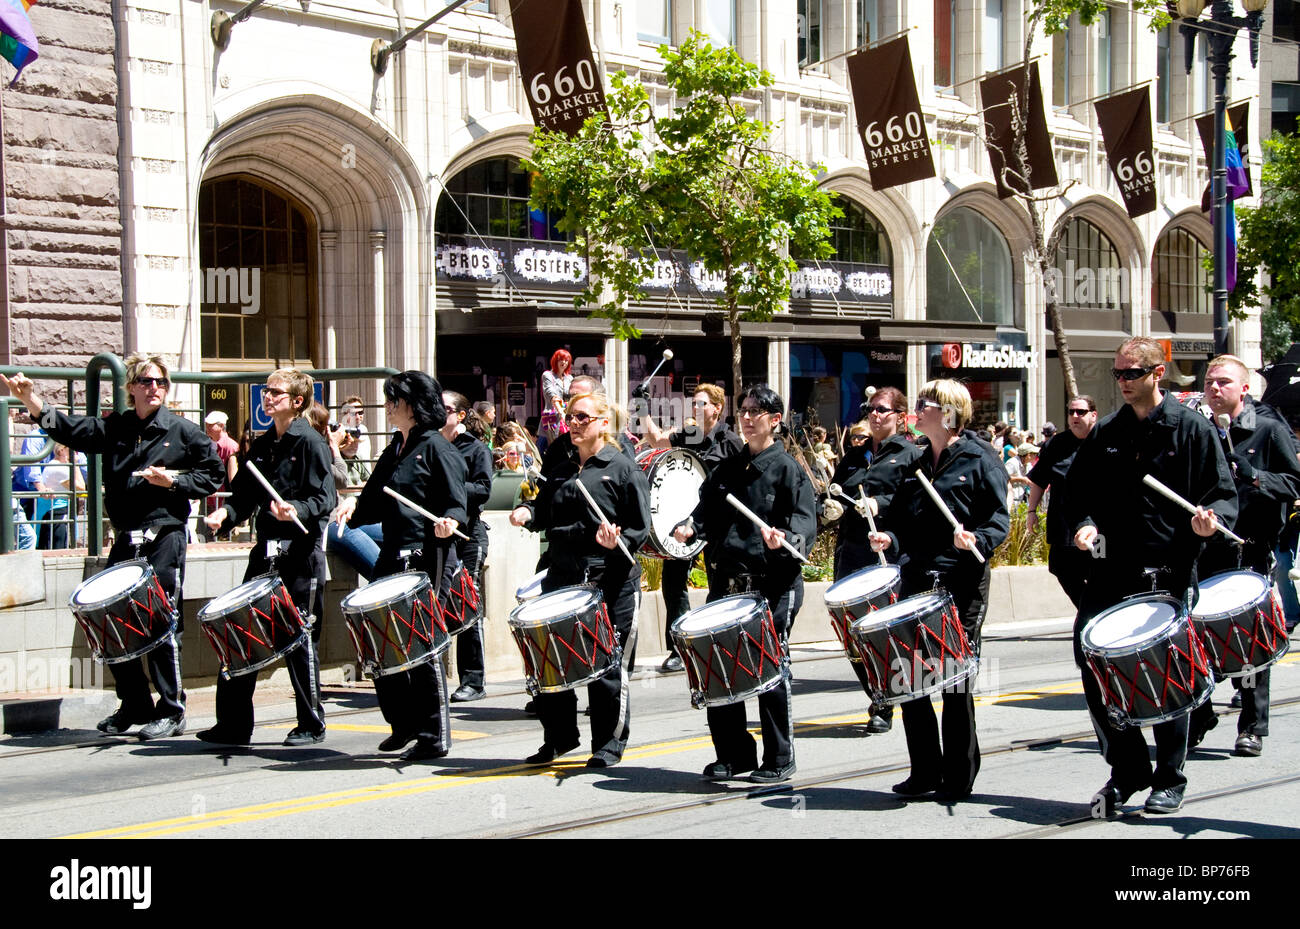 Lost Regiment Syncopated drummers at the Lesbian Gay Bisexual Transgender Pride Parade, San Francisco, California Stock Photo